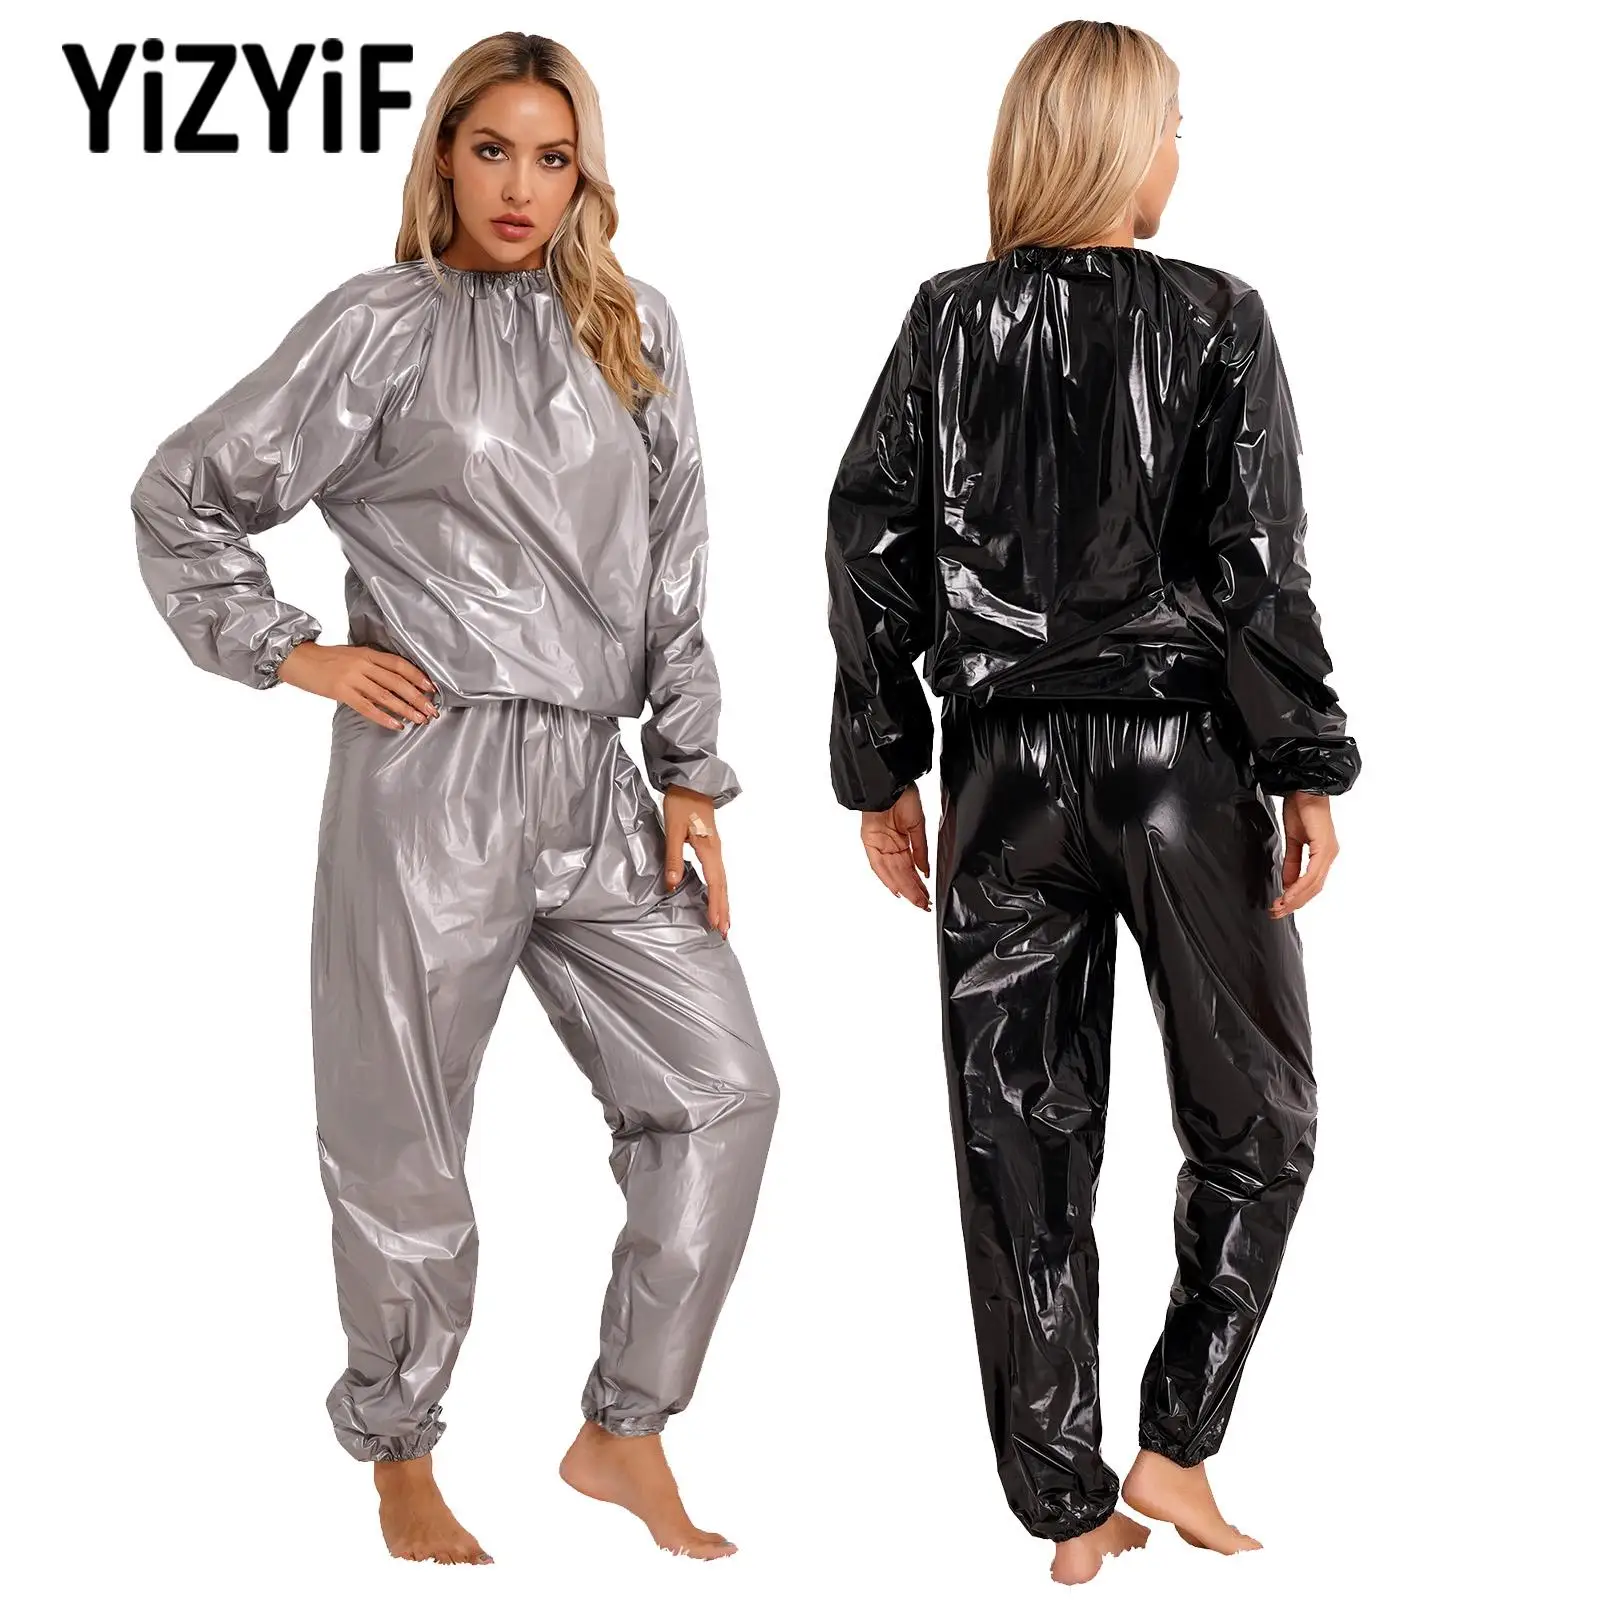 

Sauna Suit Long Sleeve PVC Elastic Cuff Top Pants Set Weight Loss Sweat Suit Slimming Fitness Gym Workout Suit for Men And Women